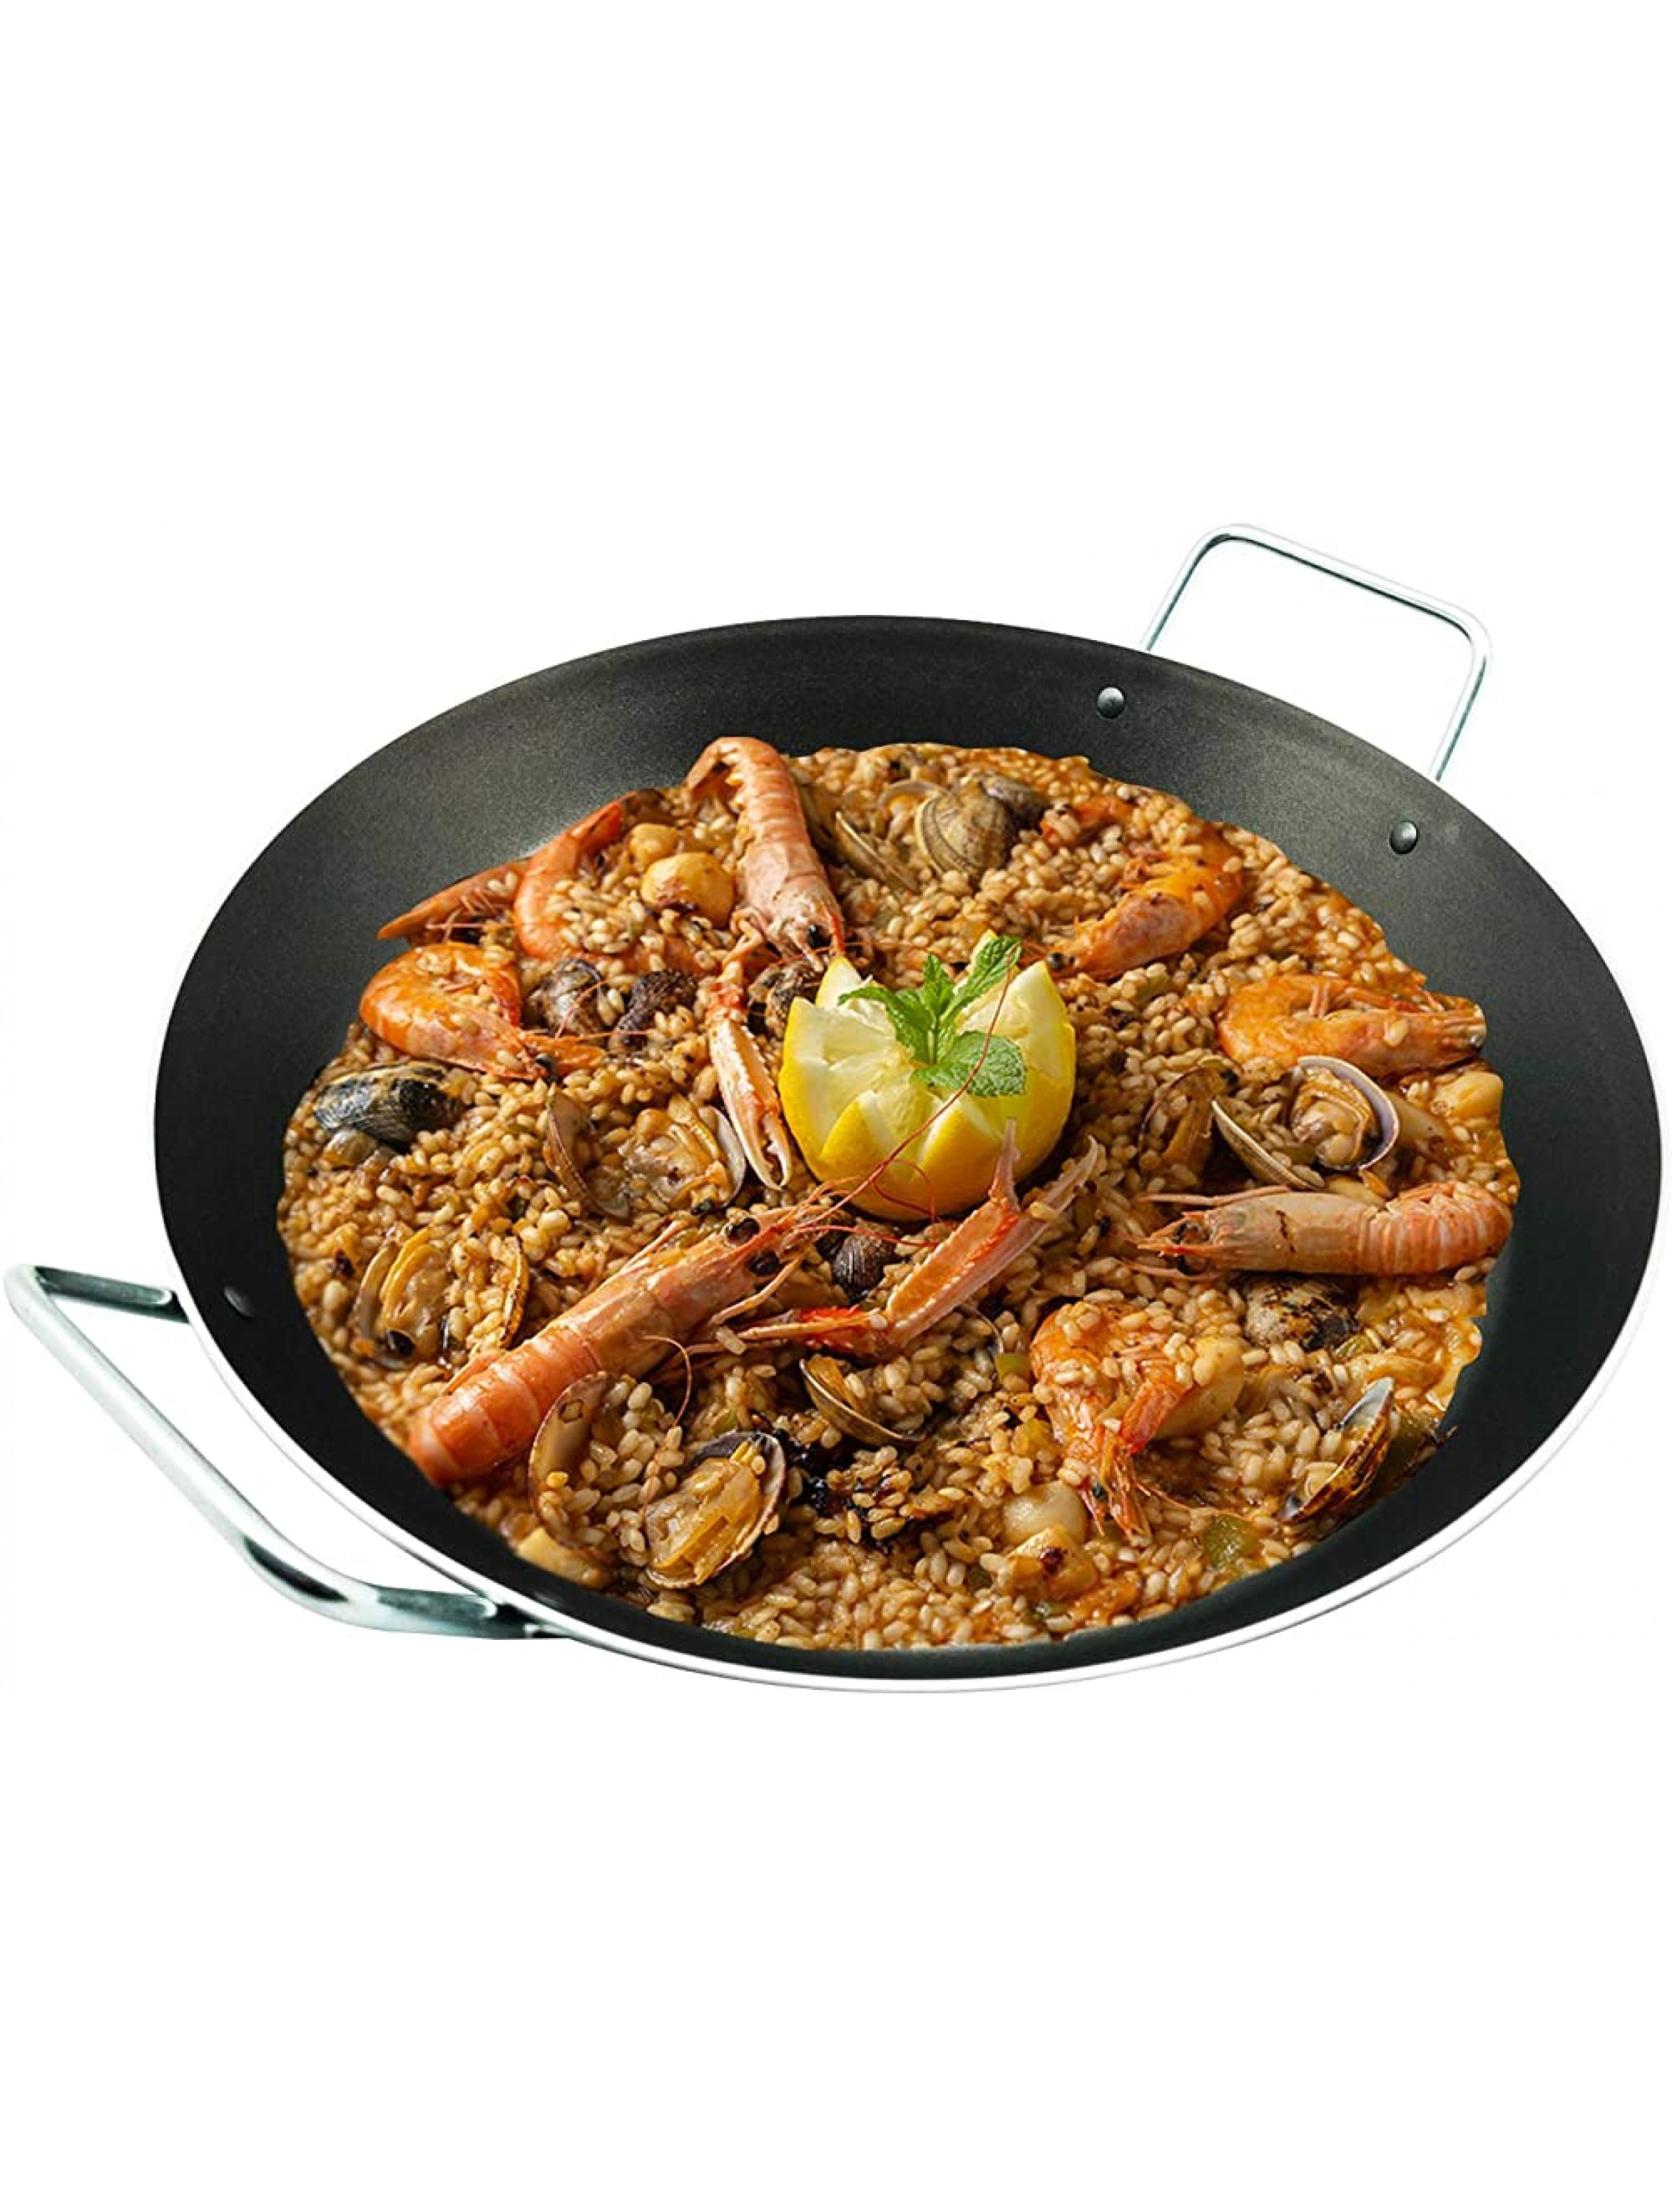 Non-Stick Aluminum Cookware Made in Italy 15.038 cm Paella Pan - BSBYFTDXL